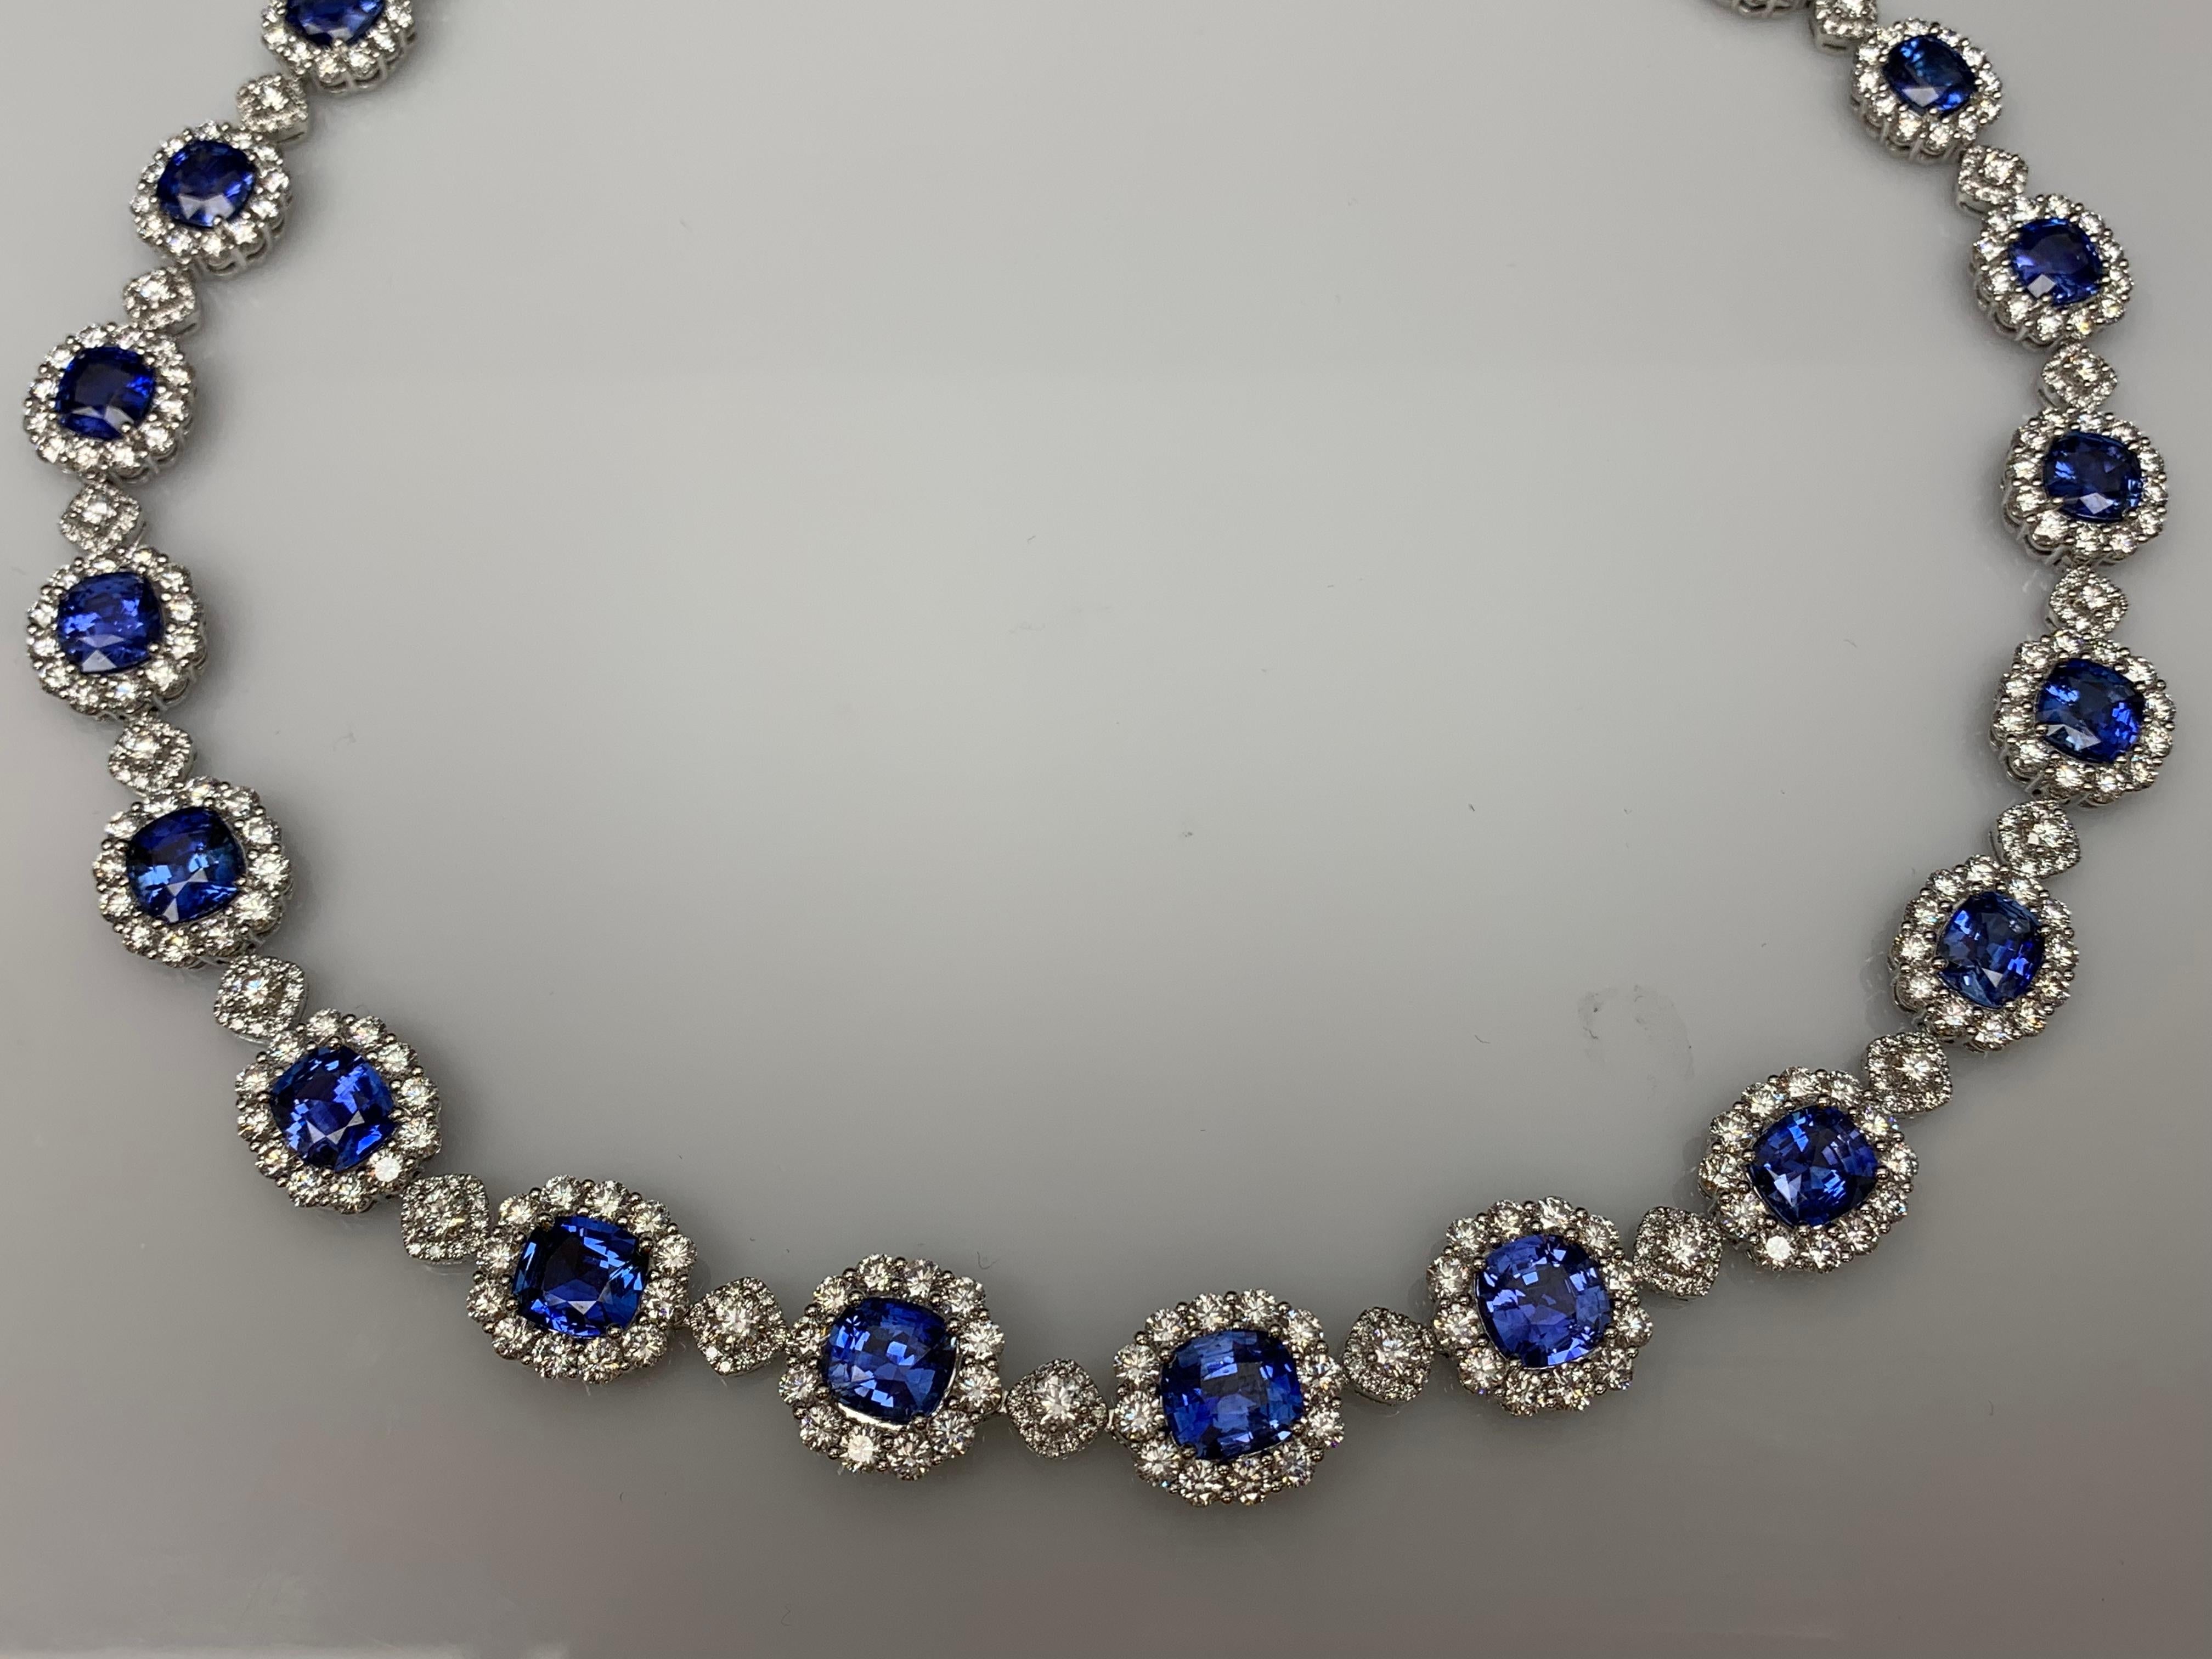 35.11 Carat Cushion Cut Blue Sapphire and Diamond Necklace in 18K White Gold For Sale 6